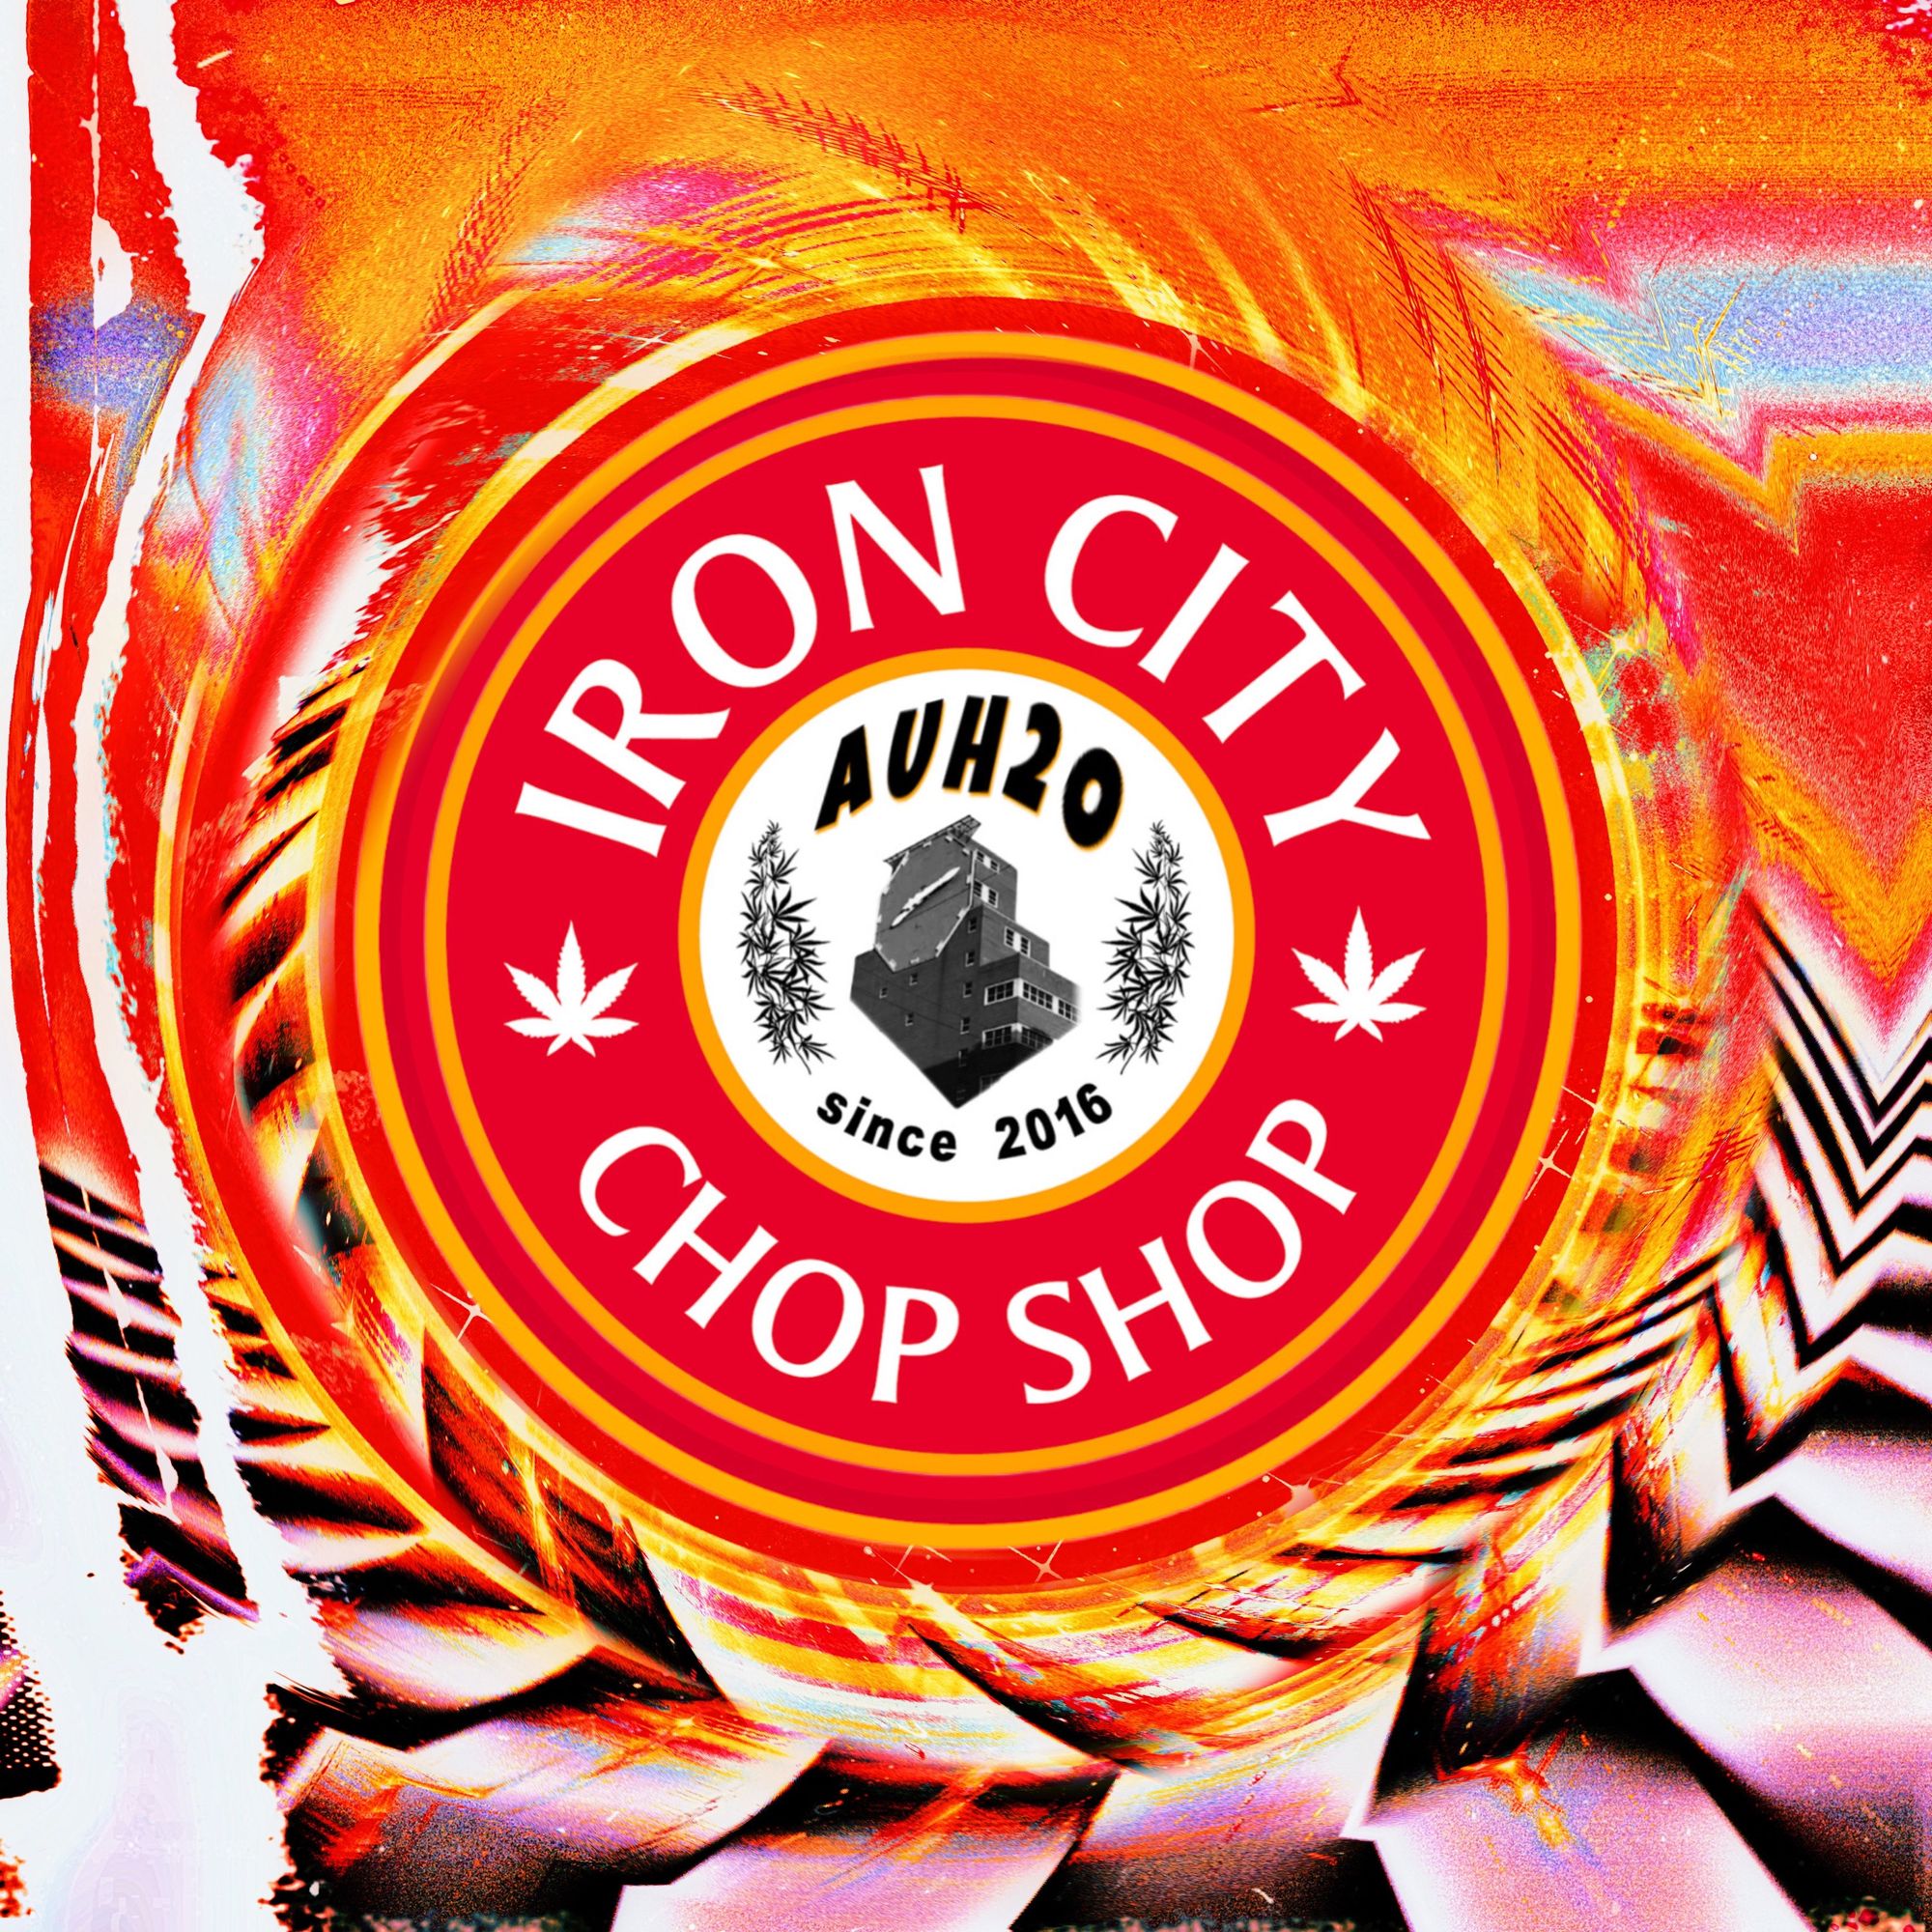 Louis Goldwater launches new music project: Iron City Chop Shop